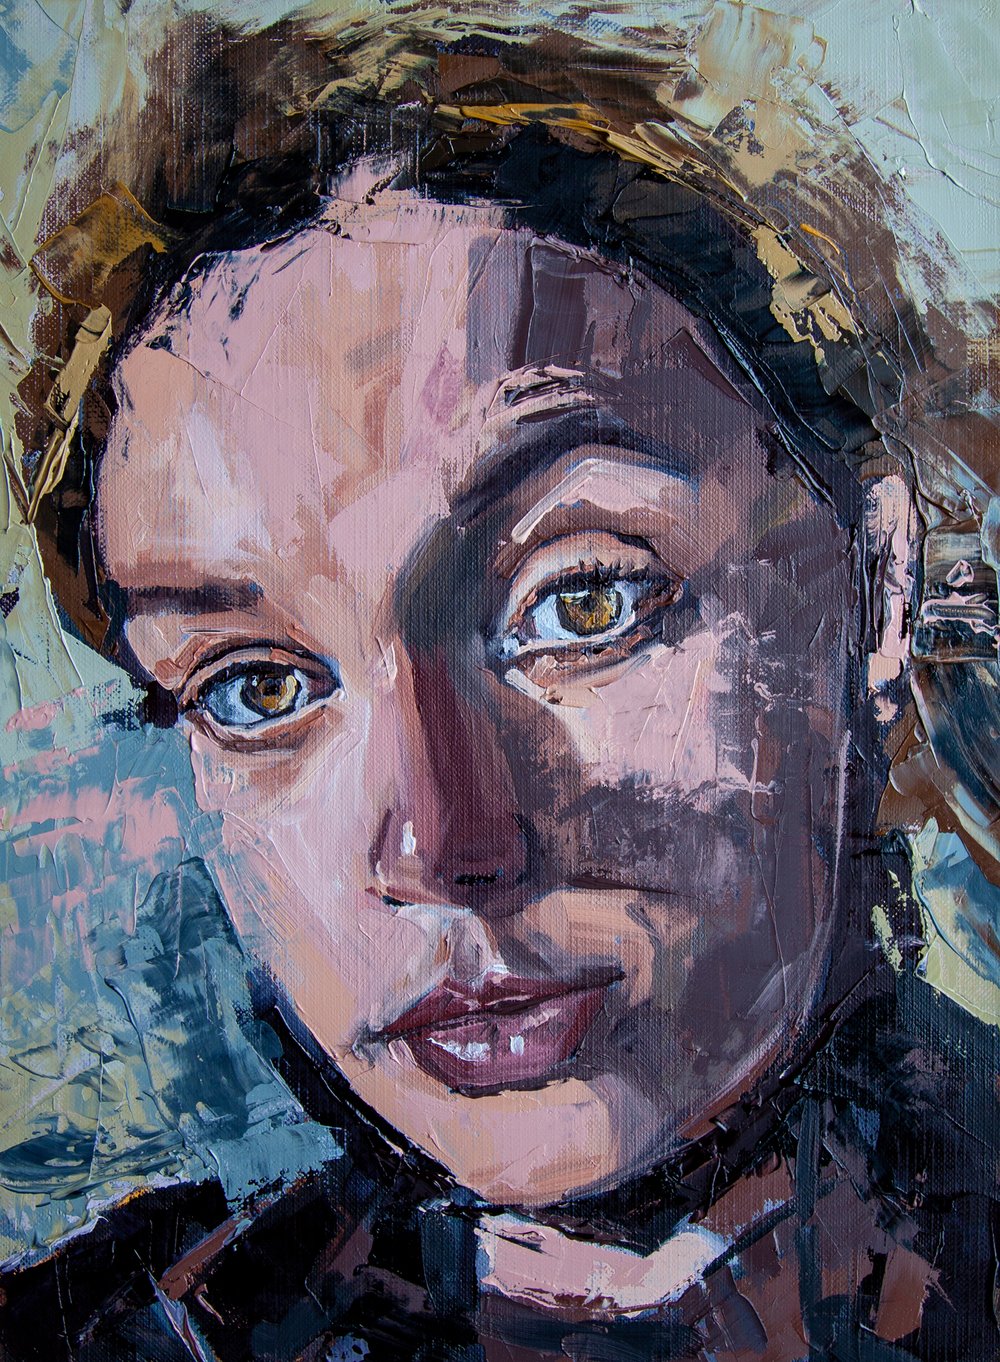 Emily Portrait - oil painting, 12 x 9 inches, AVAILABLE